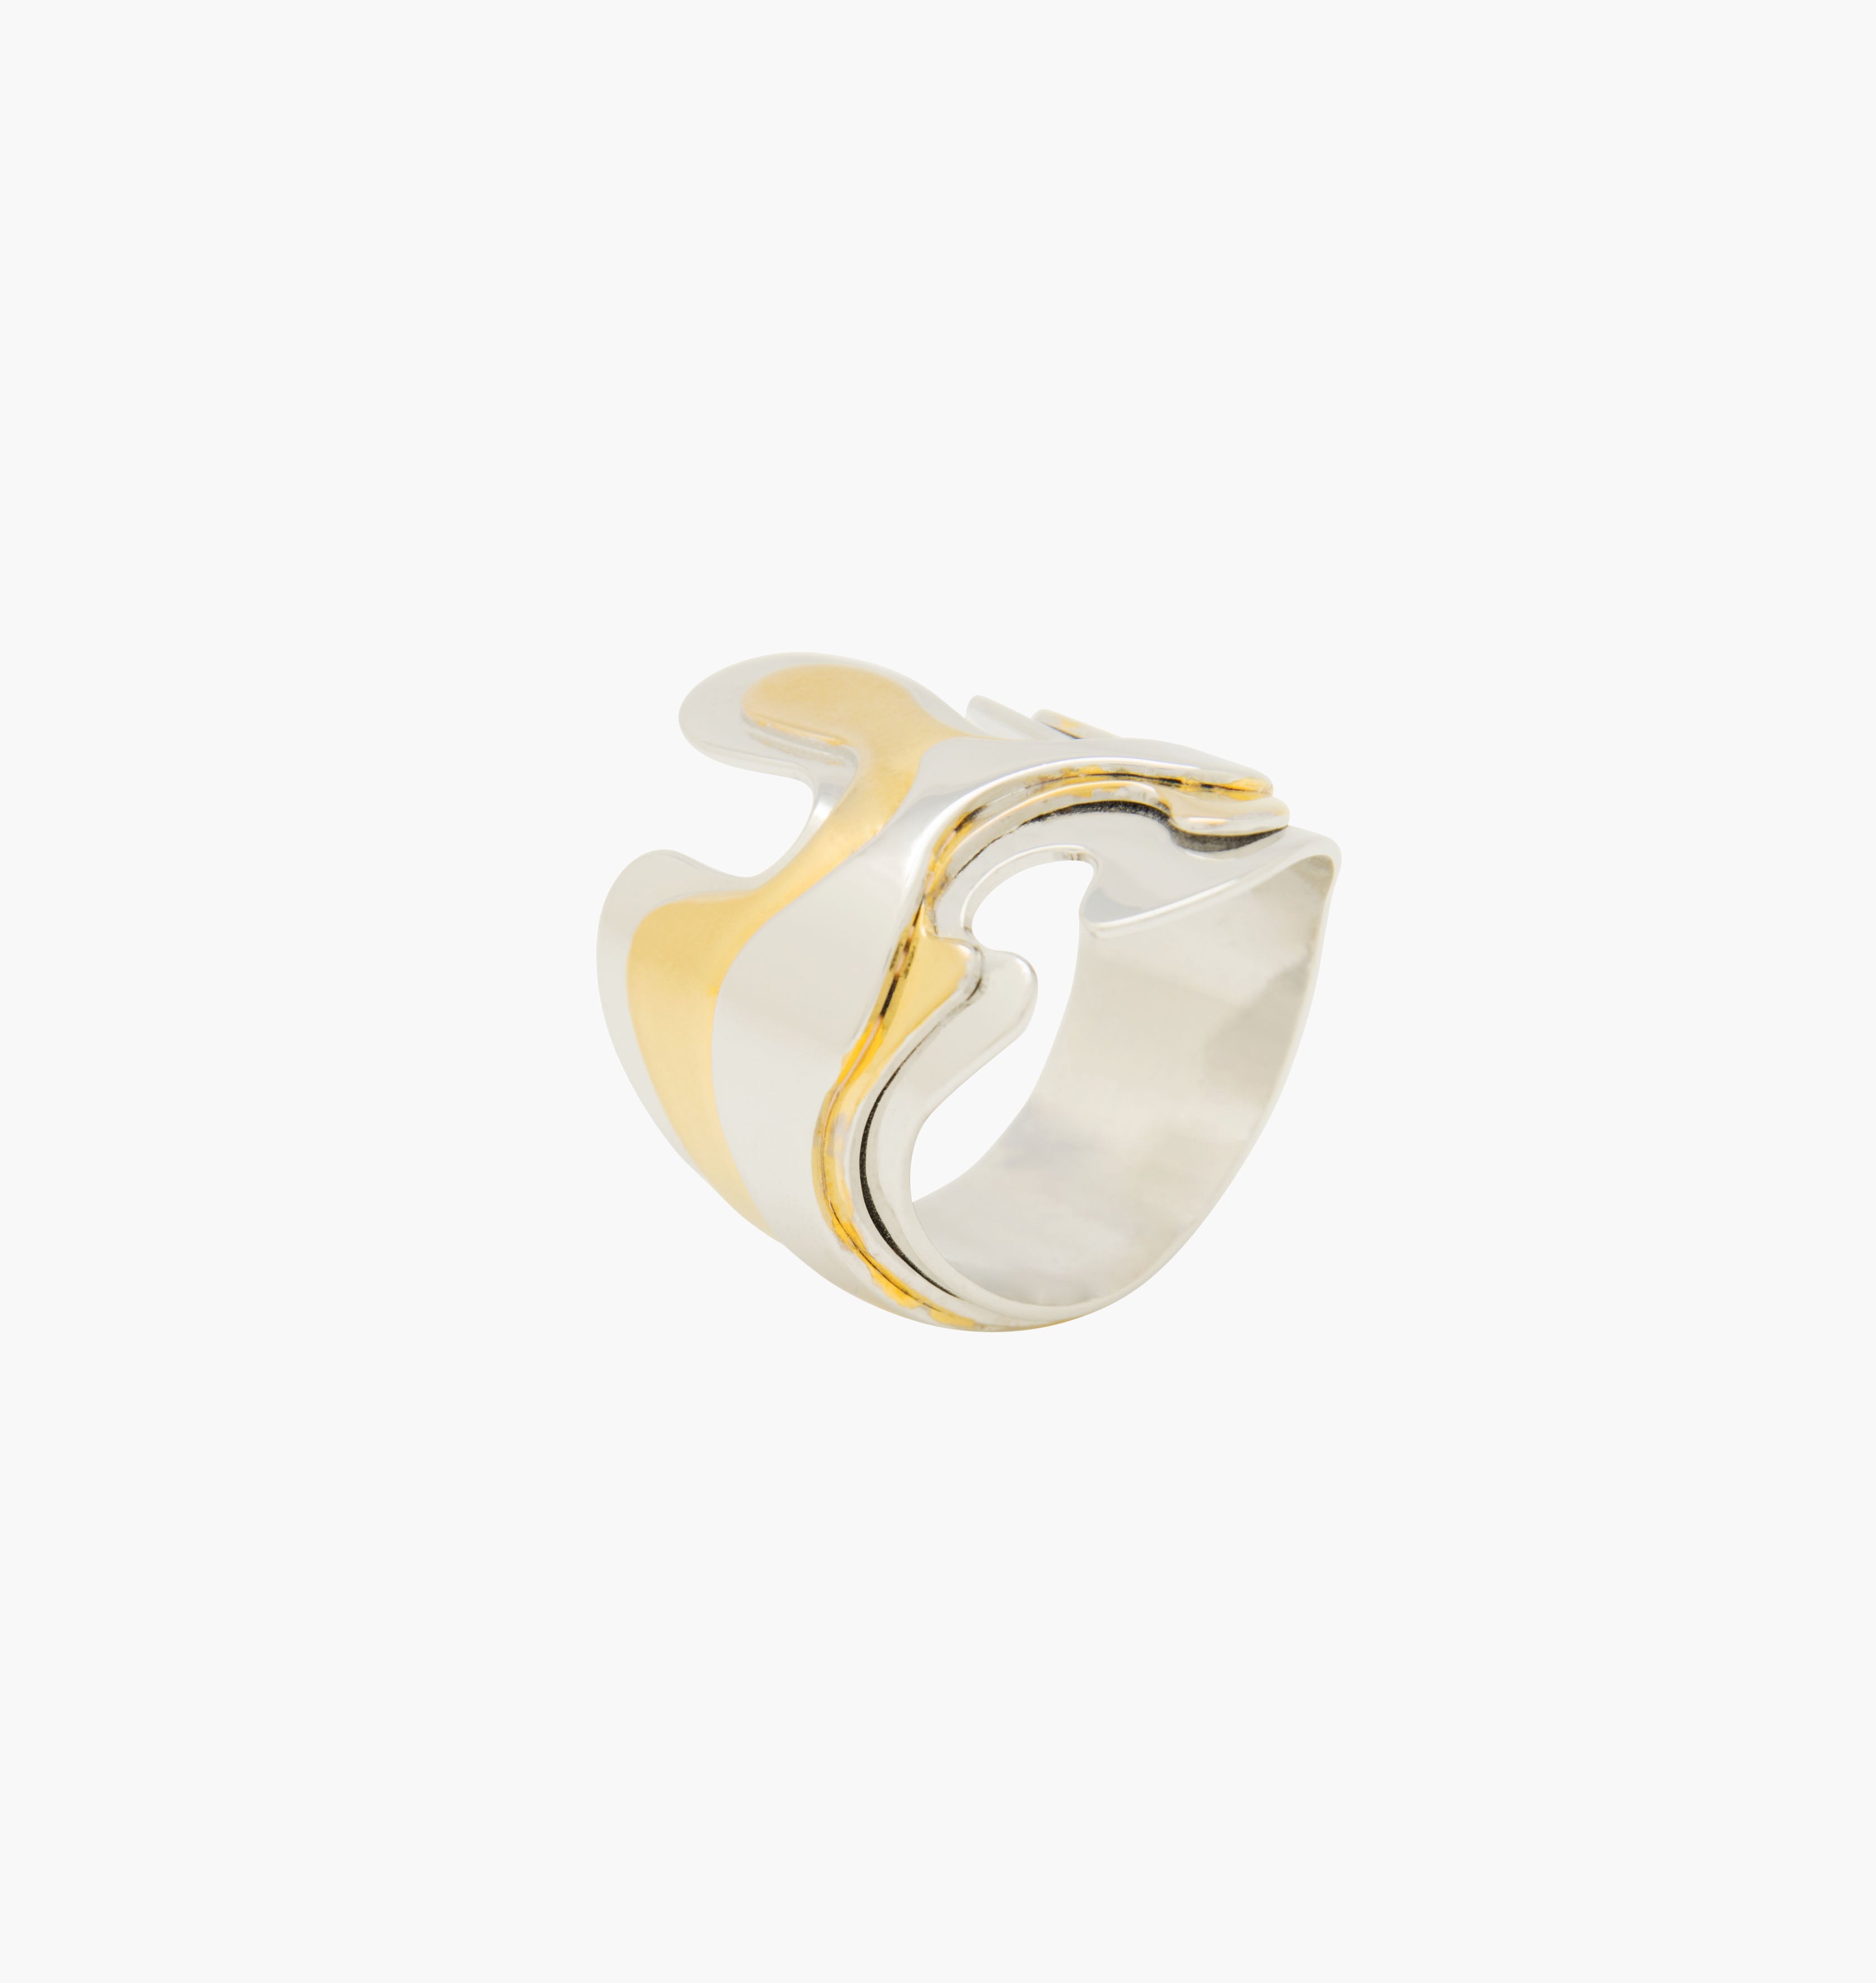 Ring FLUIDE Gold and Silver - shop.mouttoncollet.com